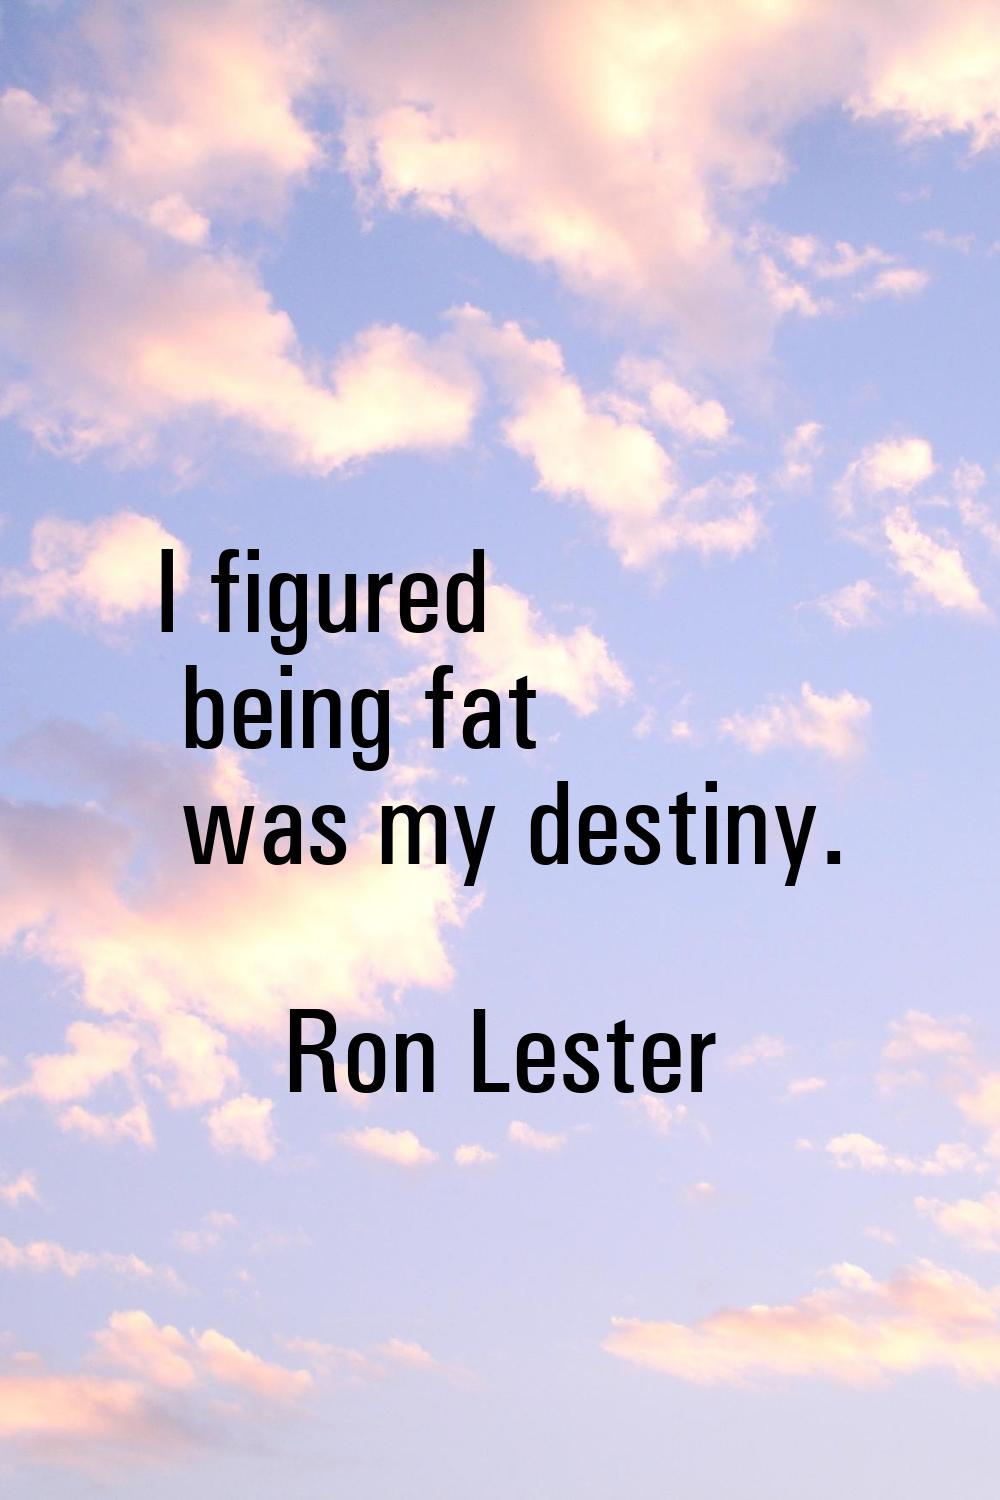 I figured being fat was my destiny.